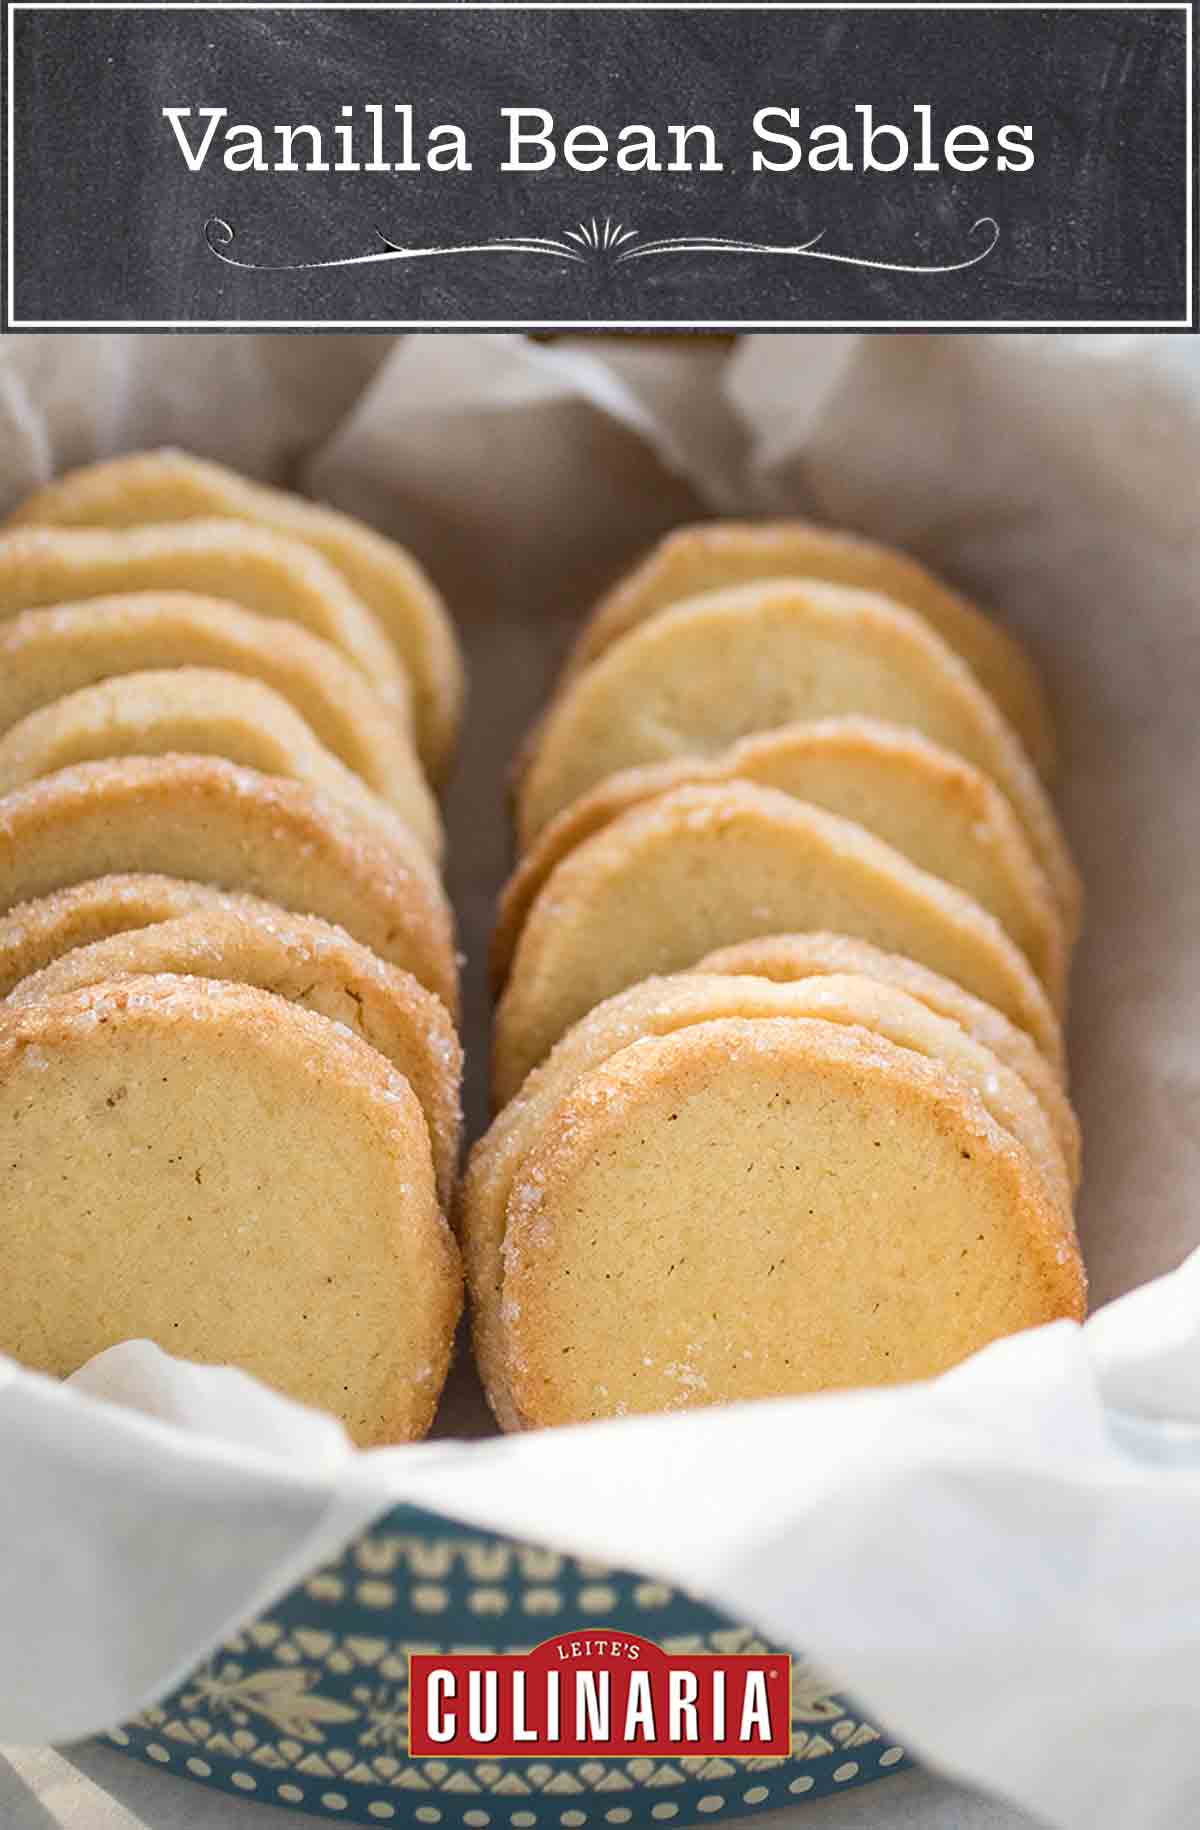 Vanilla bean sables in a lined basket